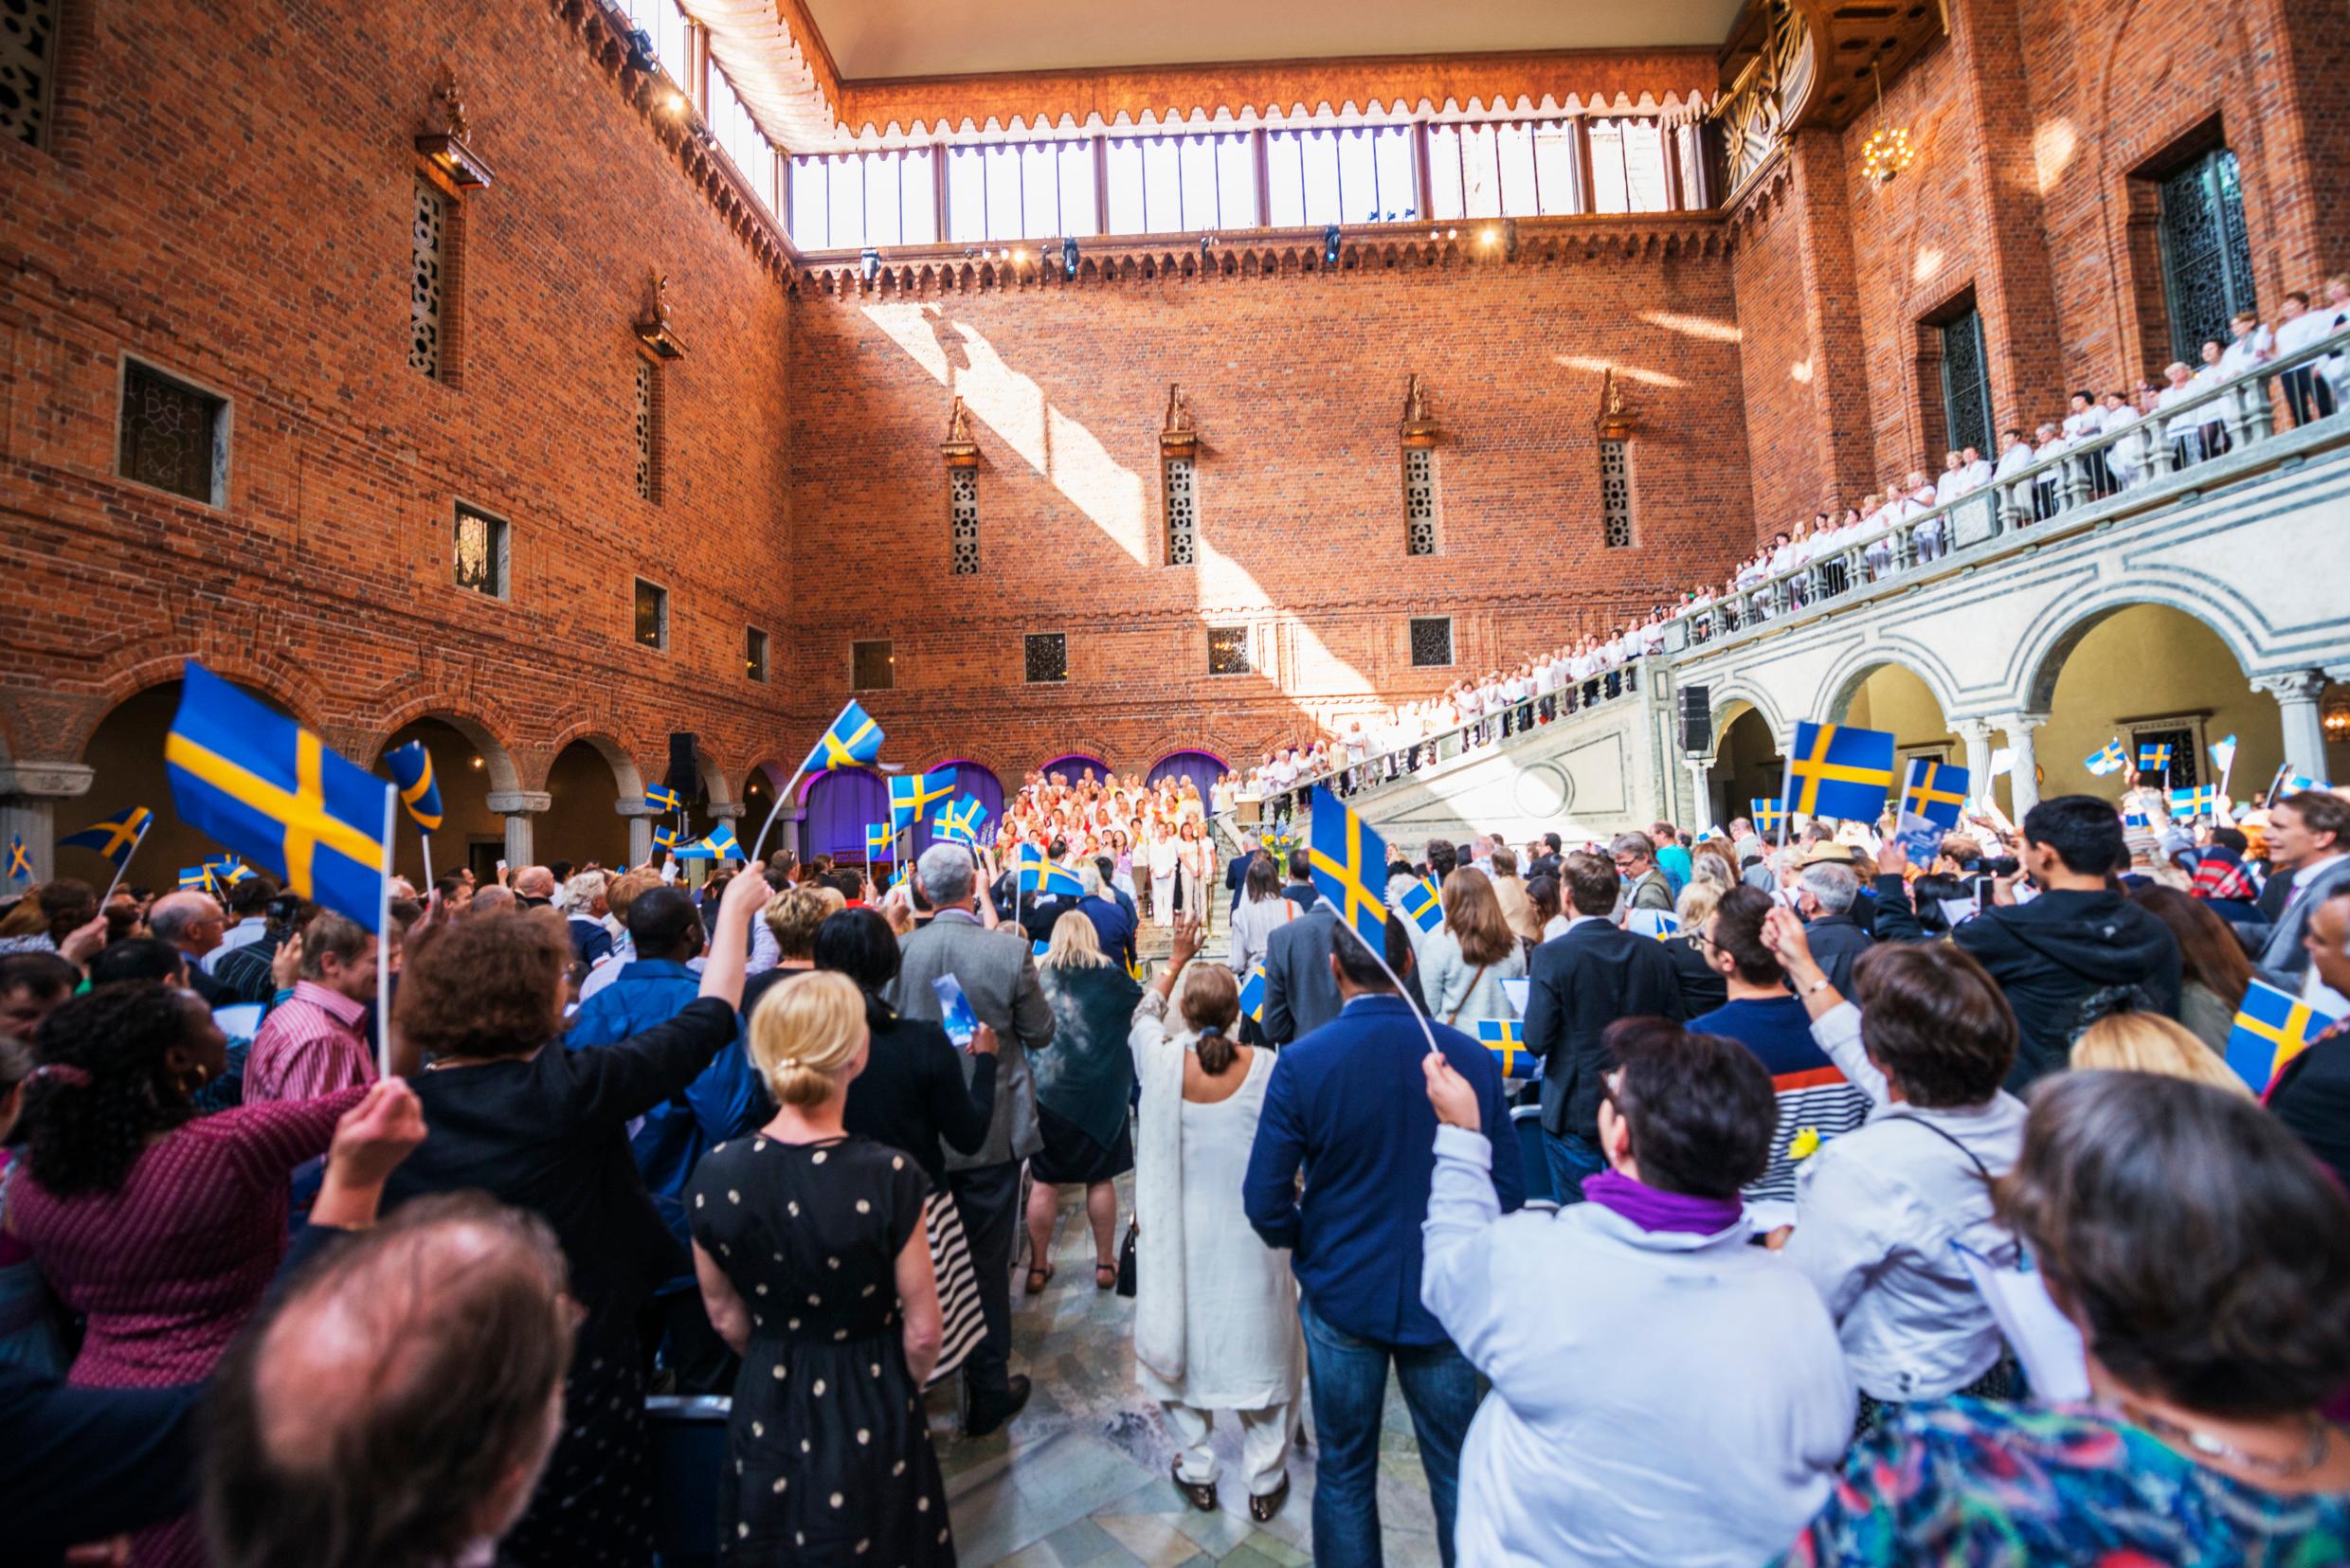 A lot of people gathered inside the City Hall of Stockholm.